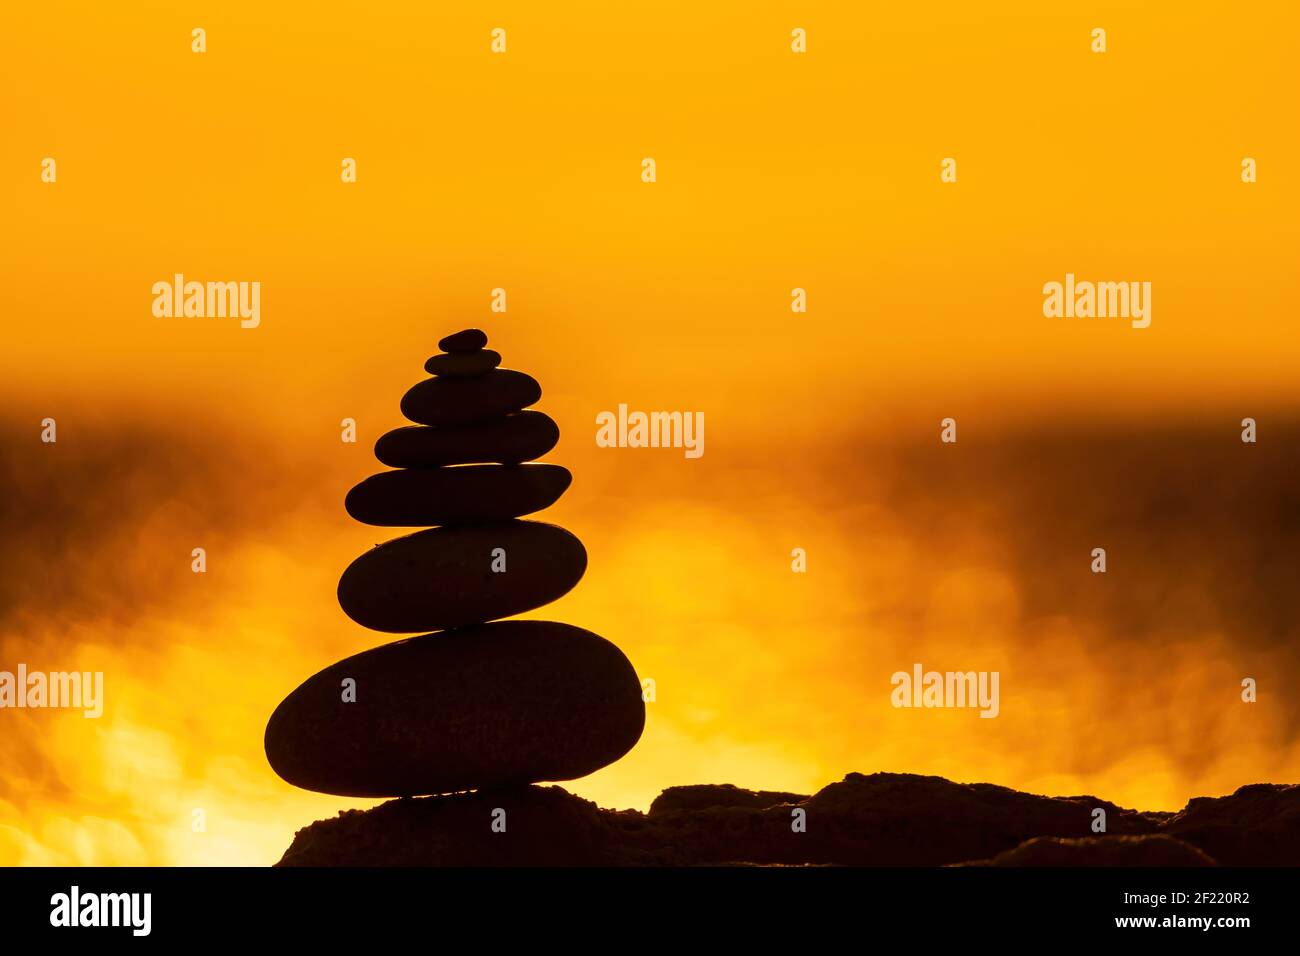 Balanced pebble pyramid silhouette on the beach. Abstract warm sunset bokeh with Sea on the background. Zen stones on the sea beach, meditation, spa Stock Photo